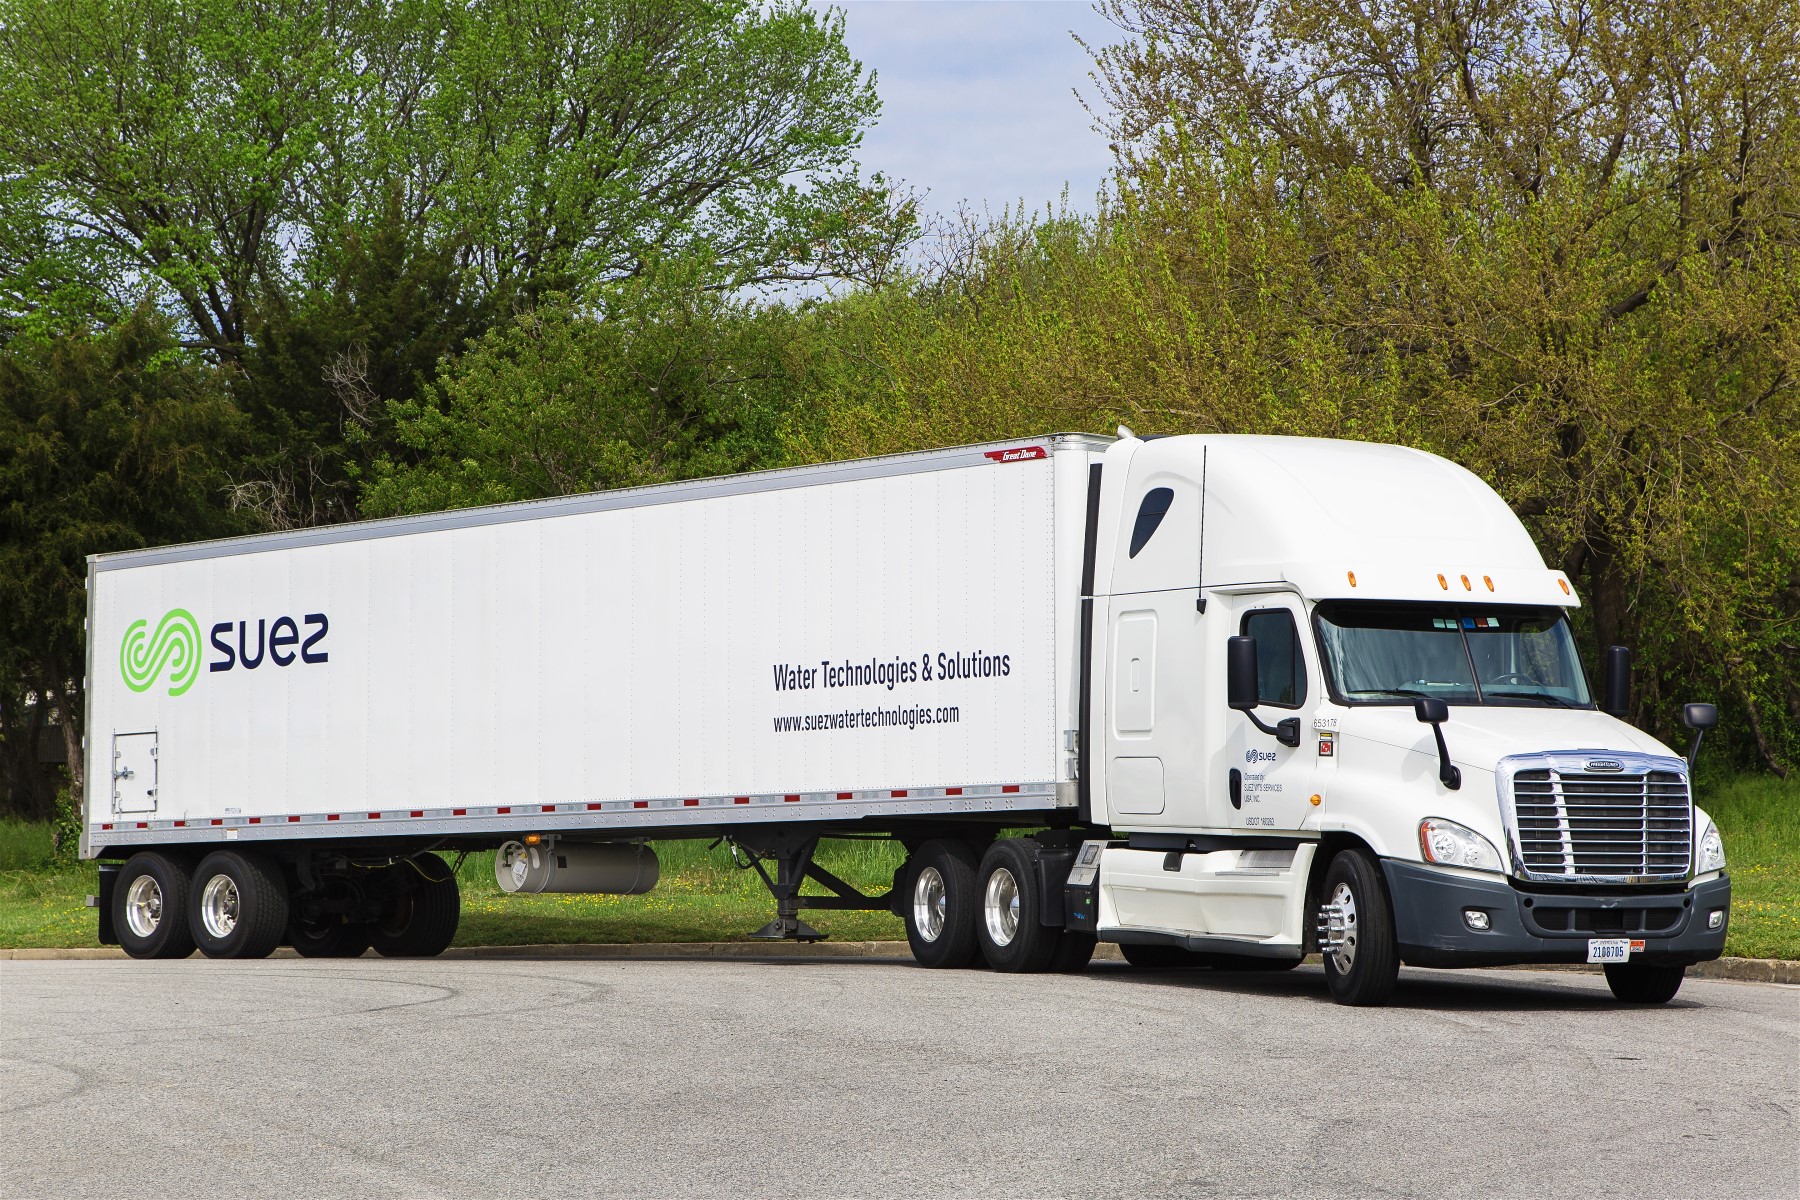 Suez Water Technologies & Solutions is opening a new mobile water service centre in Atlanta, Georgia, USA.